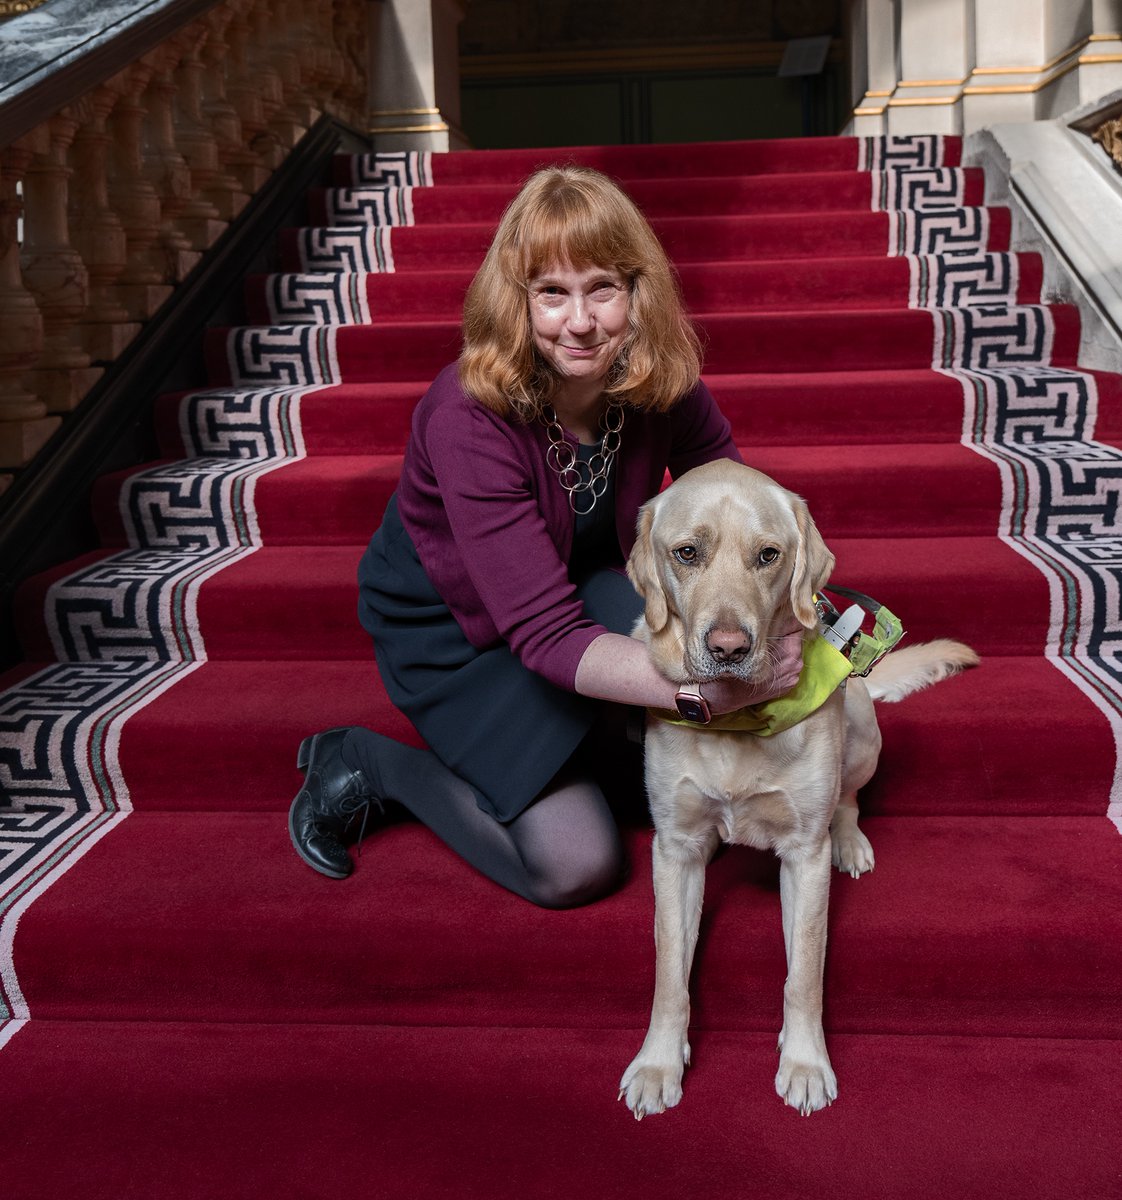 Victoria Harrison, a former RNC student, is making headlines as the UK's first blind ambassador. She will take up her new post as His Majesty's Ambassador to Slovenia in August accompanied by guide dog Otto. Read all about this history-making appointment:rnc.ac.uk/news-item.aspx…